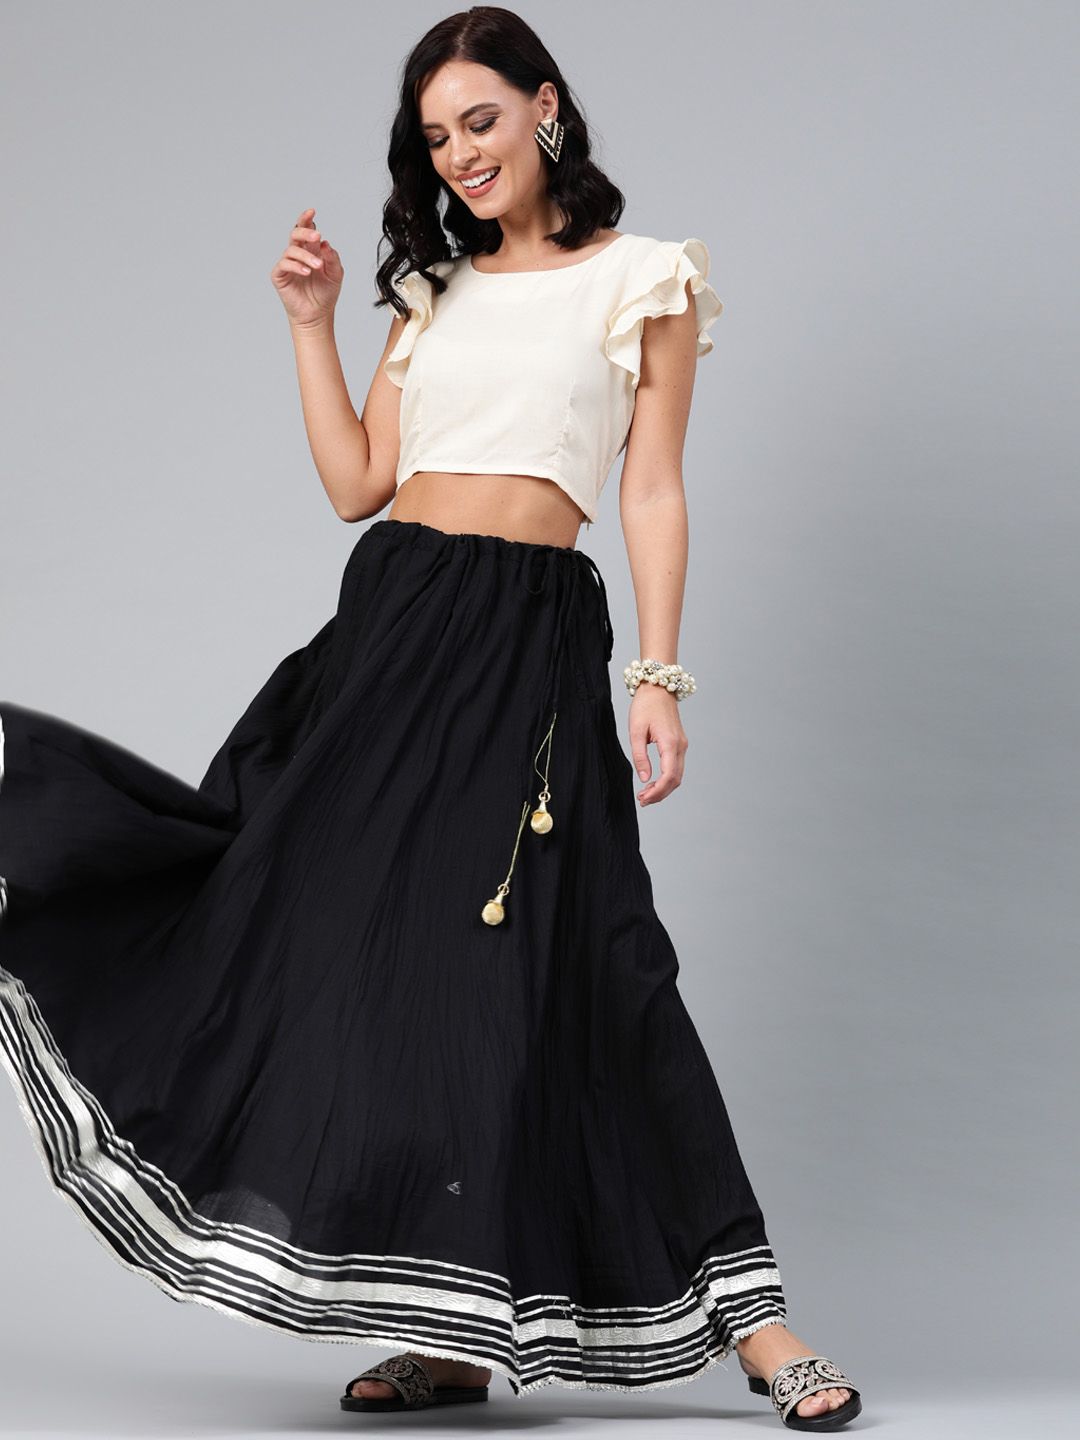 Geroo Jaipur Hand Crafted flared Black Pure Cotton Skirt with White Crop Top Price in India